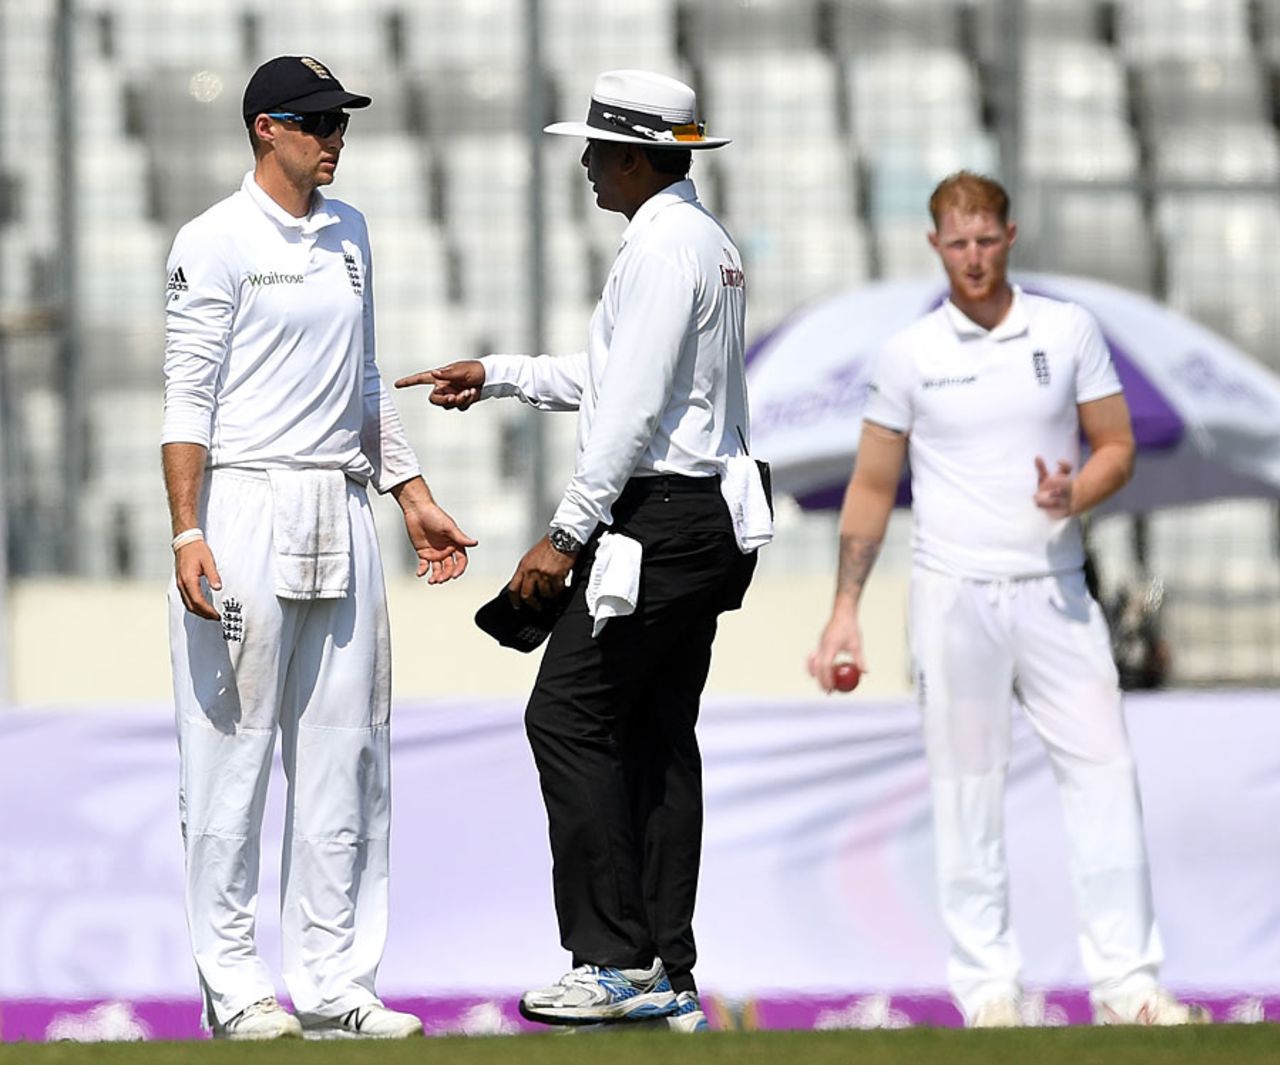 Umpire S Ravi has a word with Joe Root, Bangladesh v England, 2nd Test, Mirpur, 3rd day, October 30, 2016